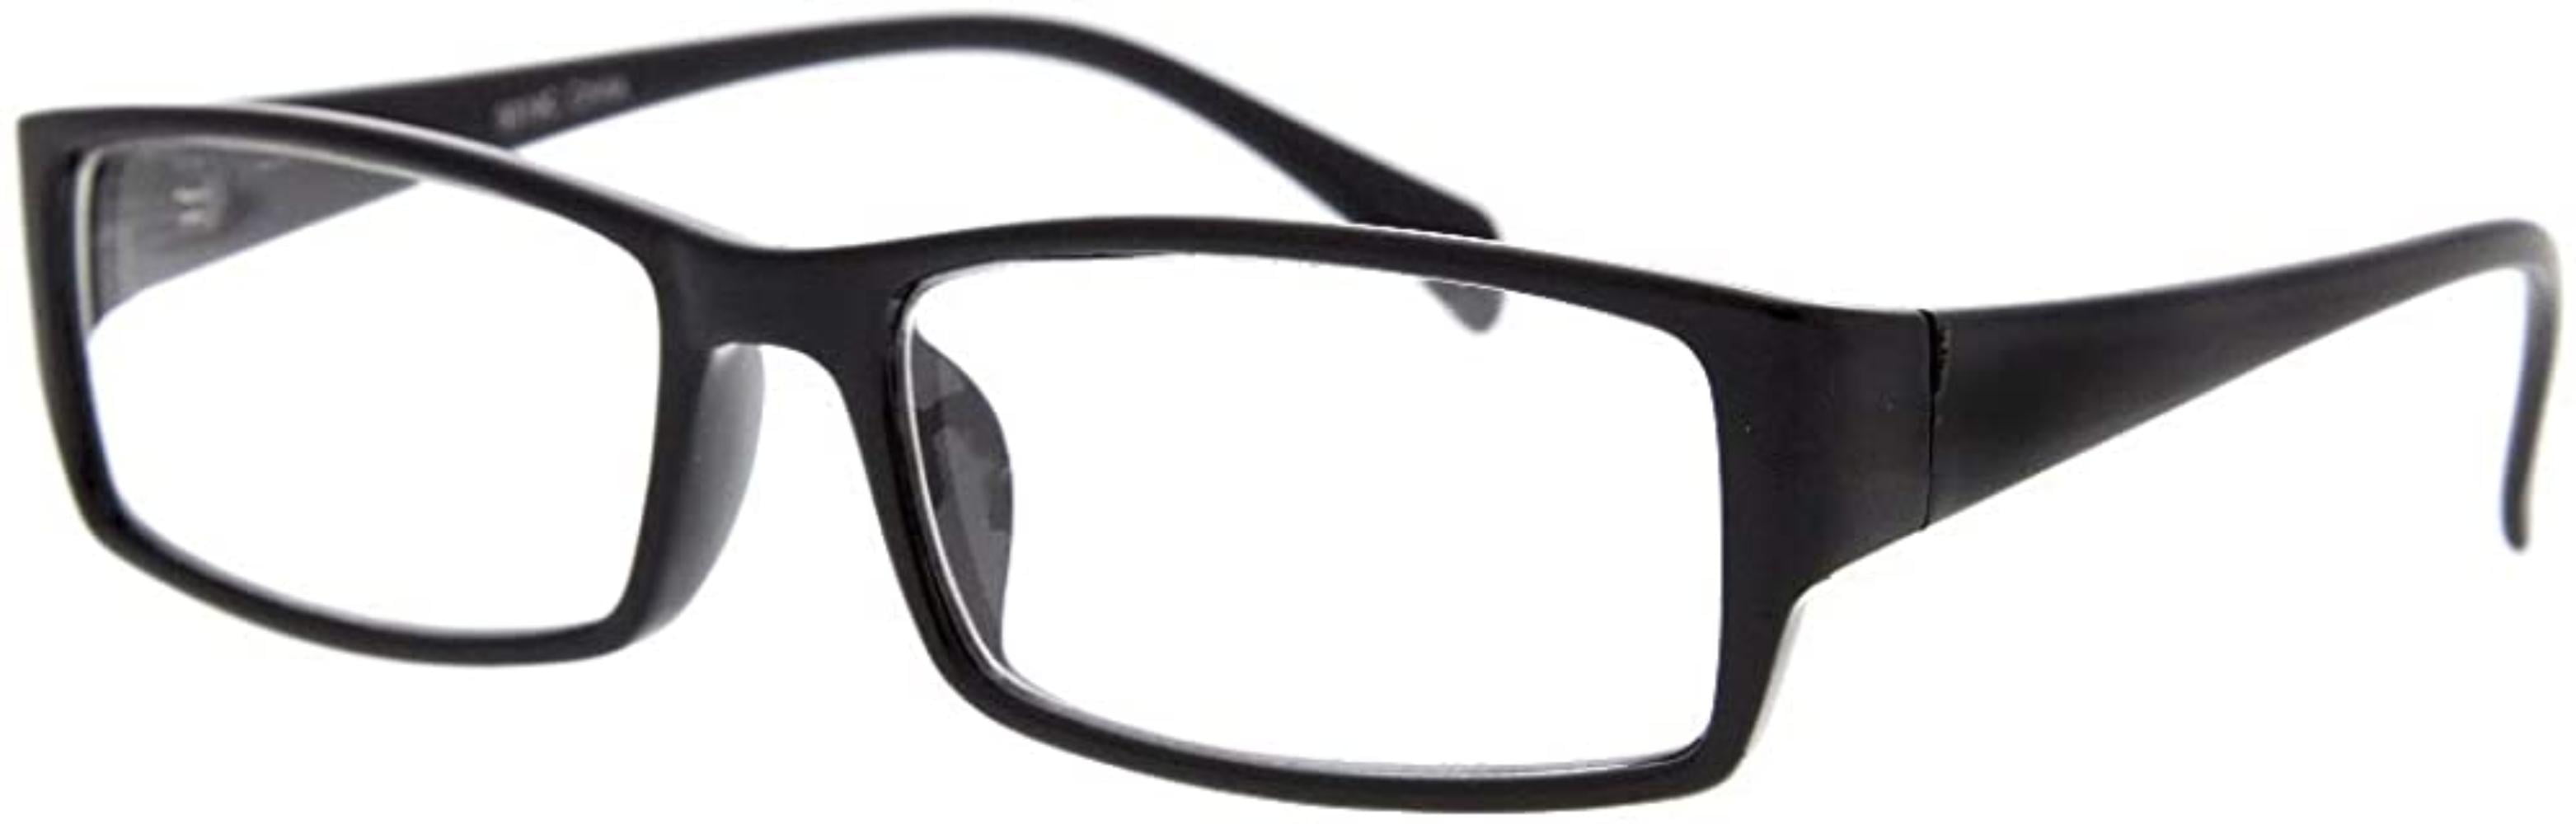 grinderPUNCH Plastic Rim Clear Lens Plano Glasses for Men and Women,  plastic frame By Visit the grinderPUNCH Store